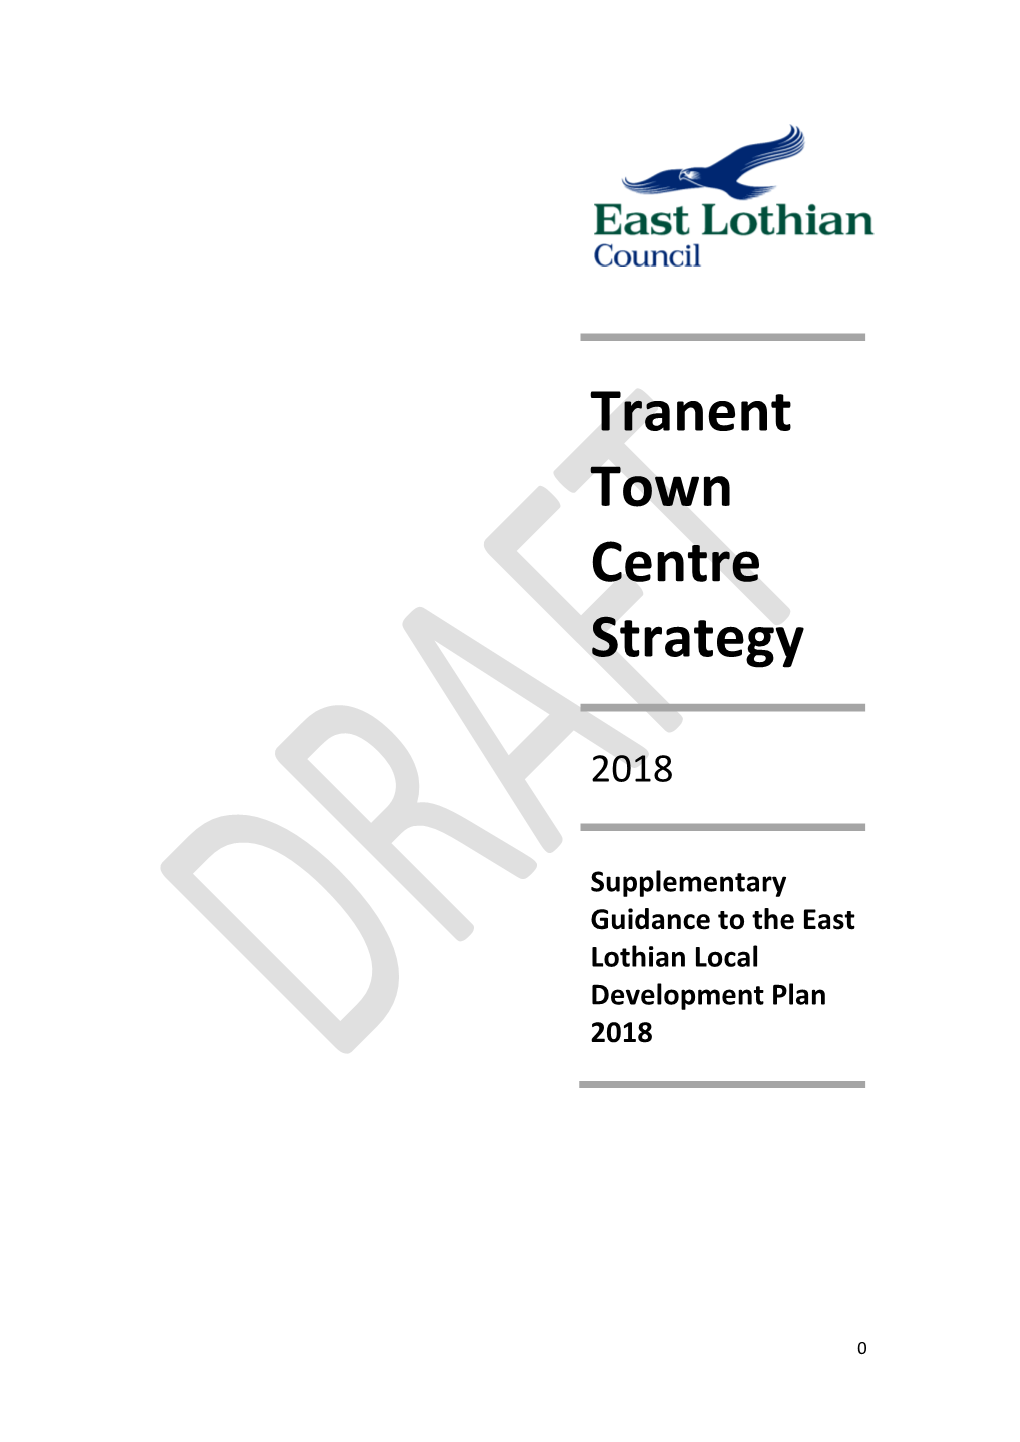 Tranent Town Centre Strategy